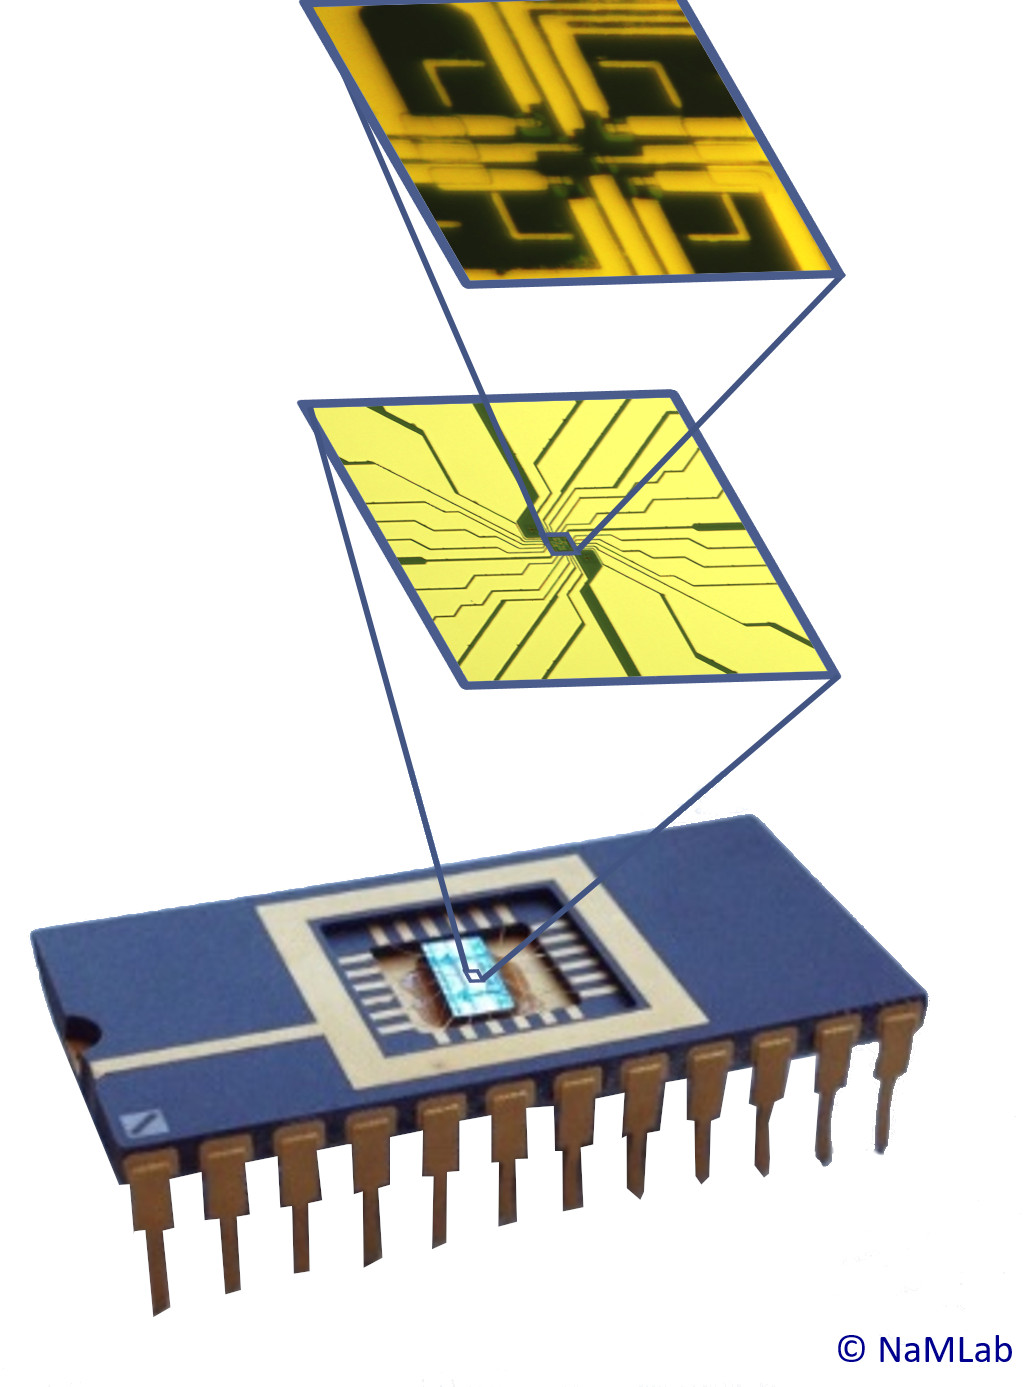 Packaged volatile memristor devices fabricated at NaMLab, with a microscope image and a scanning electron microscope image showing a zoom in on the memristor structures.